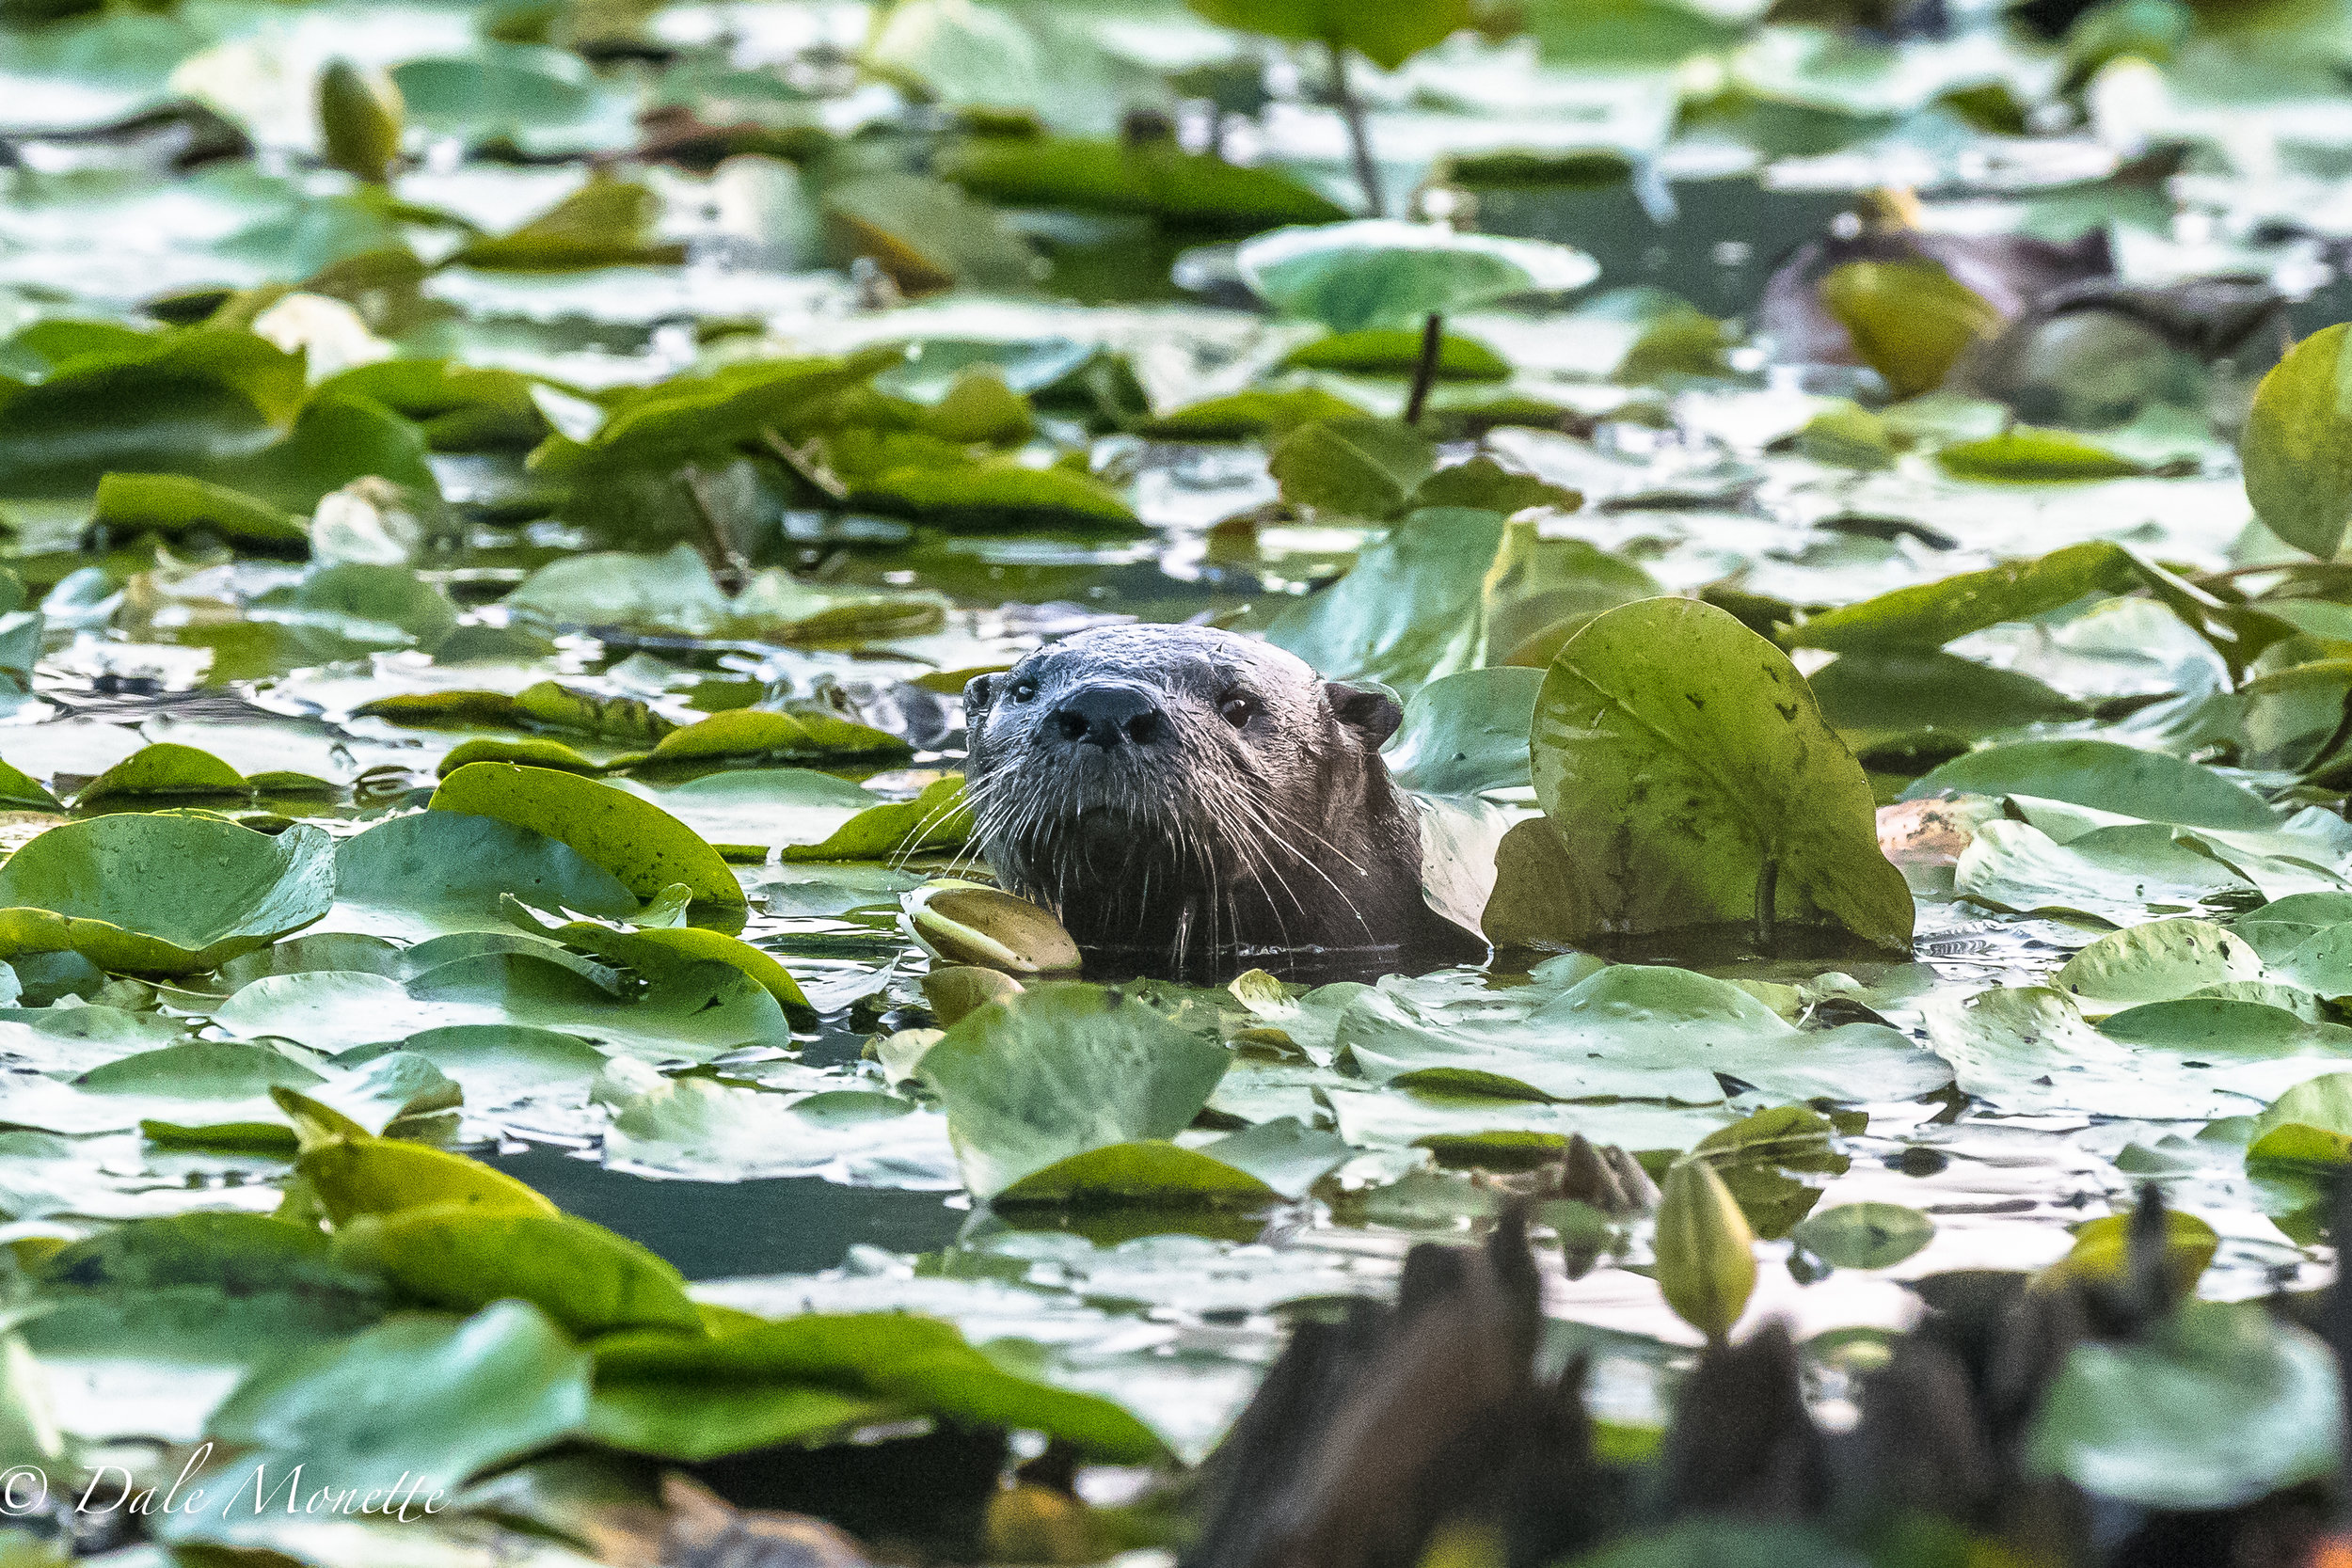   Every now and then a northern river otter appears as if by magic to check me out &nbsp;8/10/19  